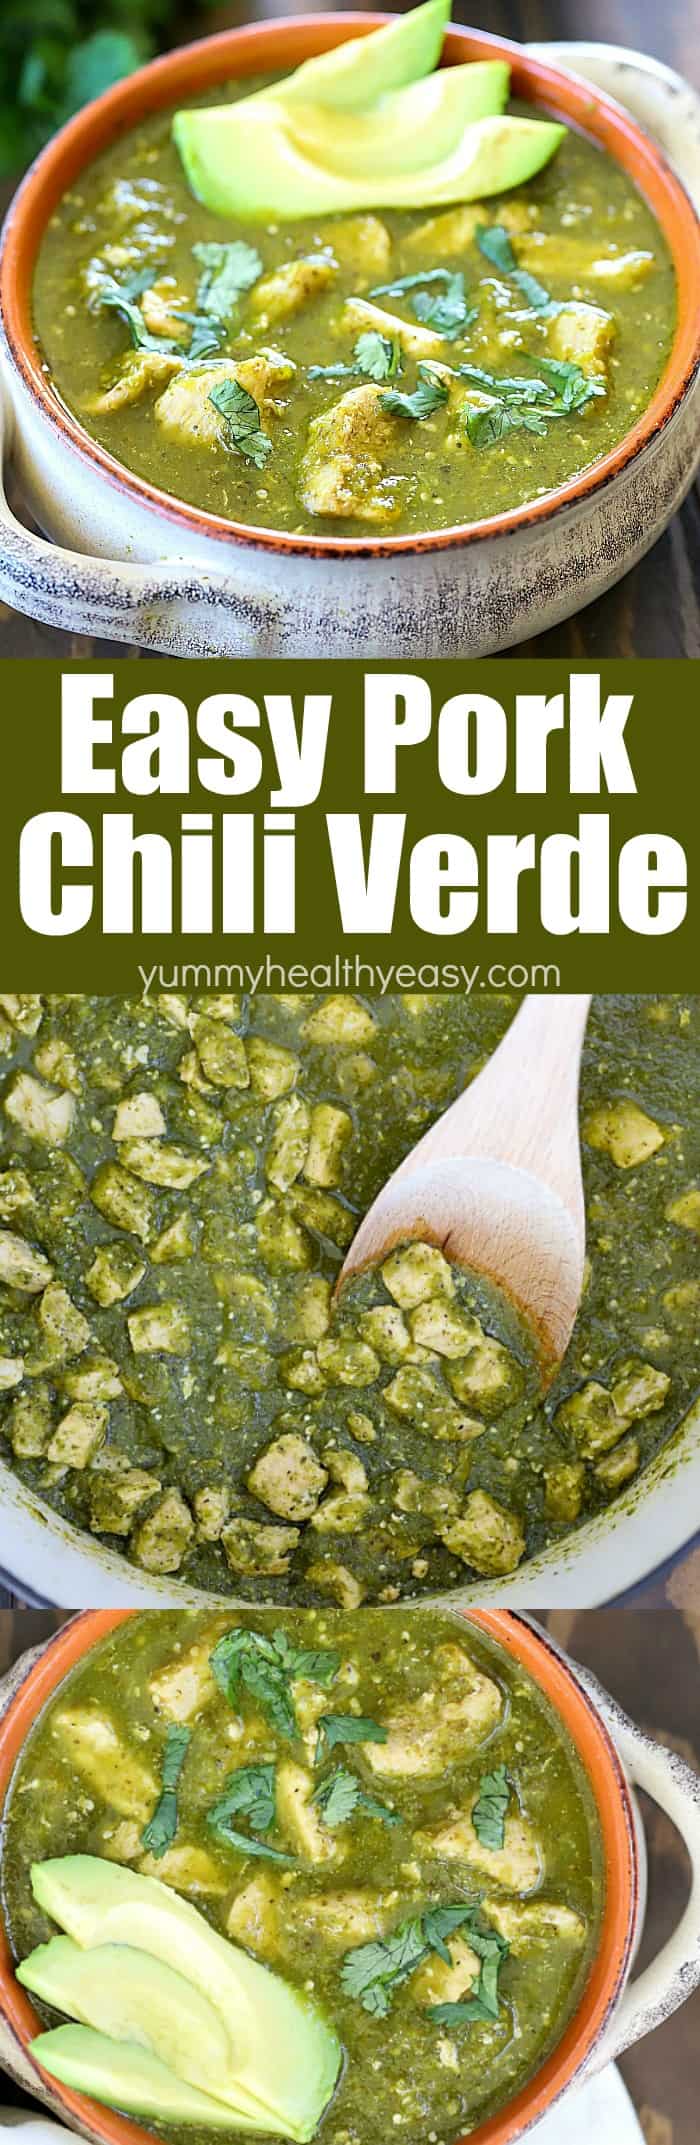 You will LOVE the bold flavors in this Pork Chili Verde! Cubed pieces of pork loin are simmered until super tender and then added to a delicious homemade verde sauce - SO good! Comfort food at its best! Plus my recap from the Pass the Pork Tour in Michigan! #ad #pork #recipe #dinner #chiliverde #verde #mexicanfood #easyrecipe #yummyhealthyeasy #yummy